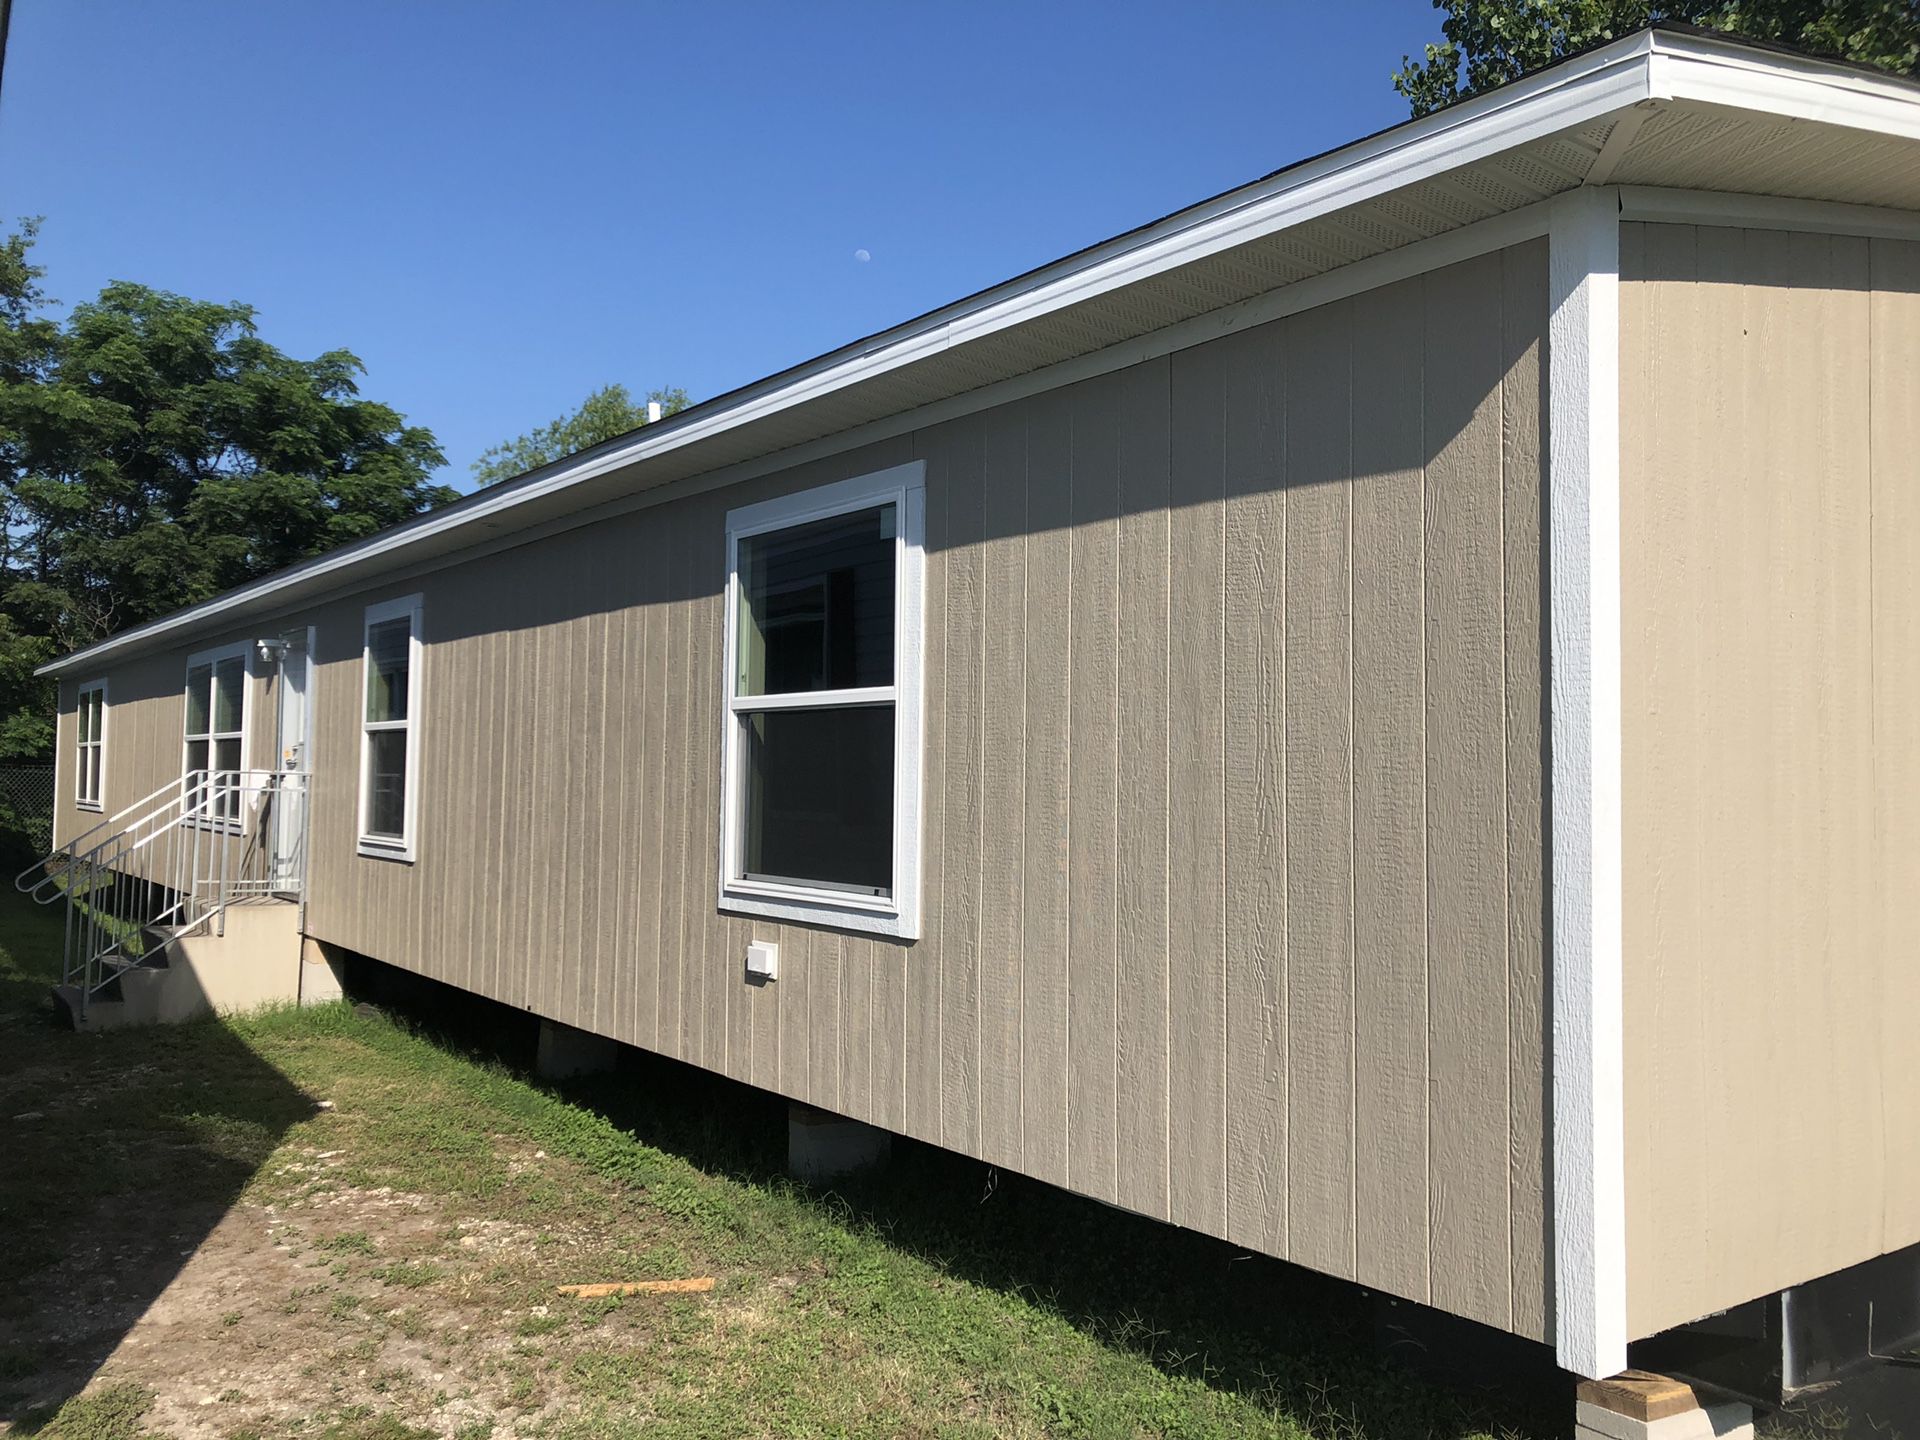 5 bedrooms 3 bathrooms double wide mobile home ready for your land